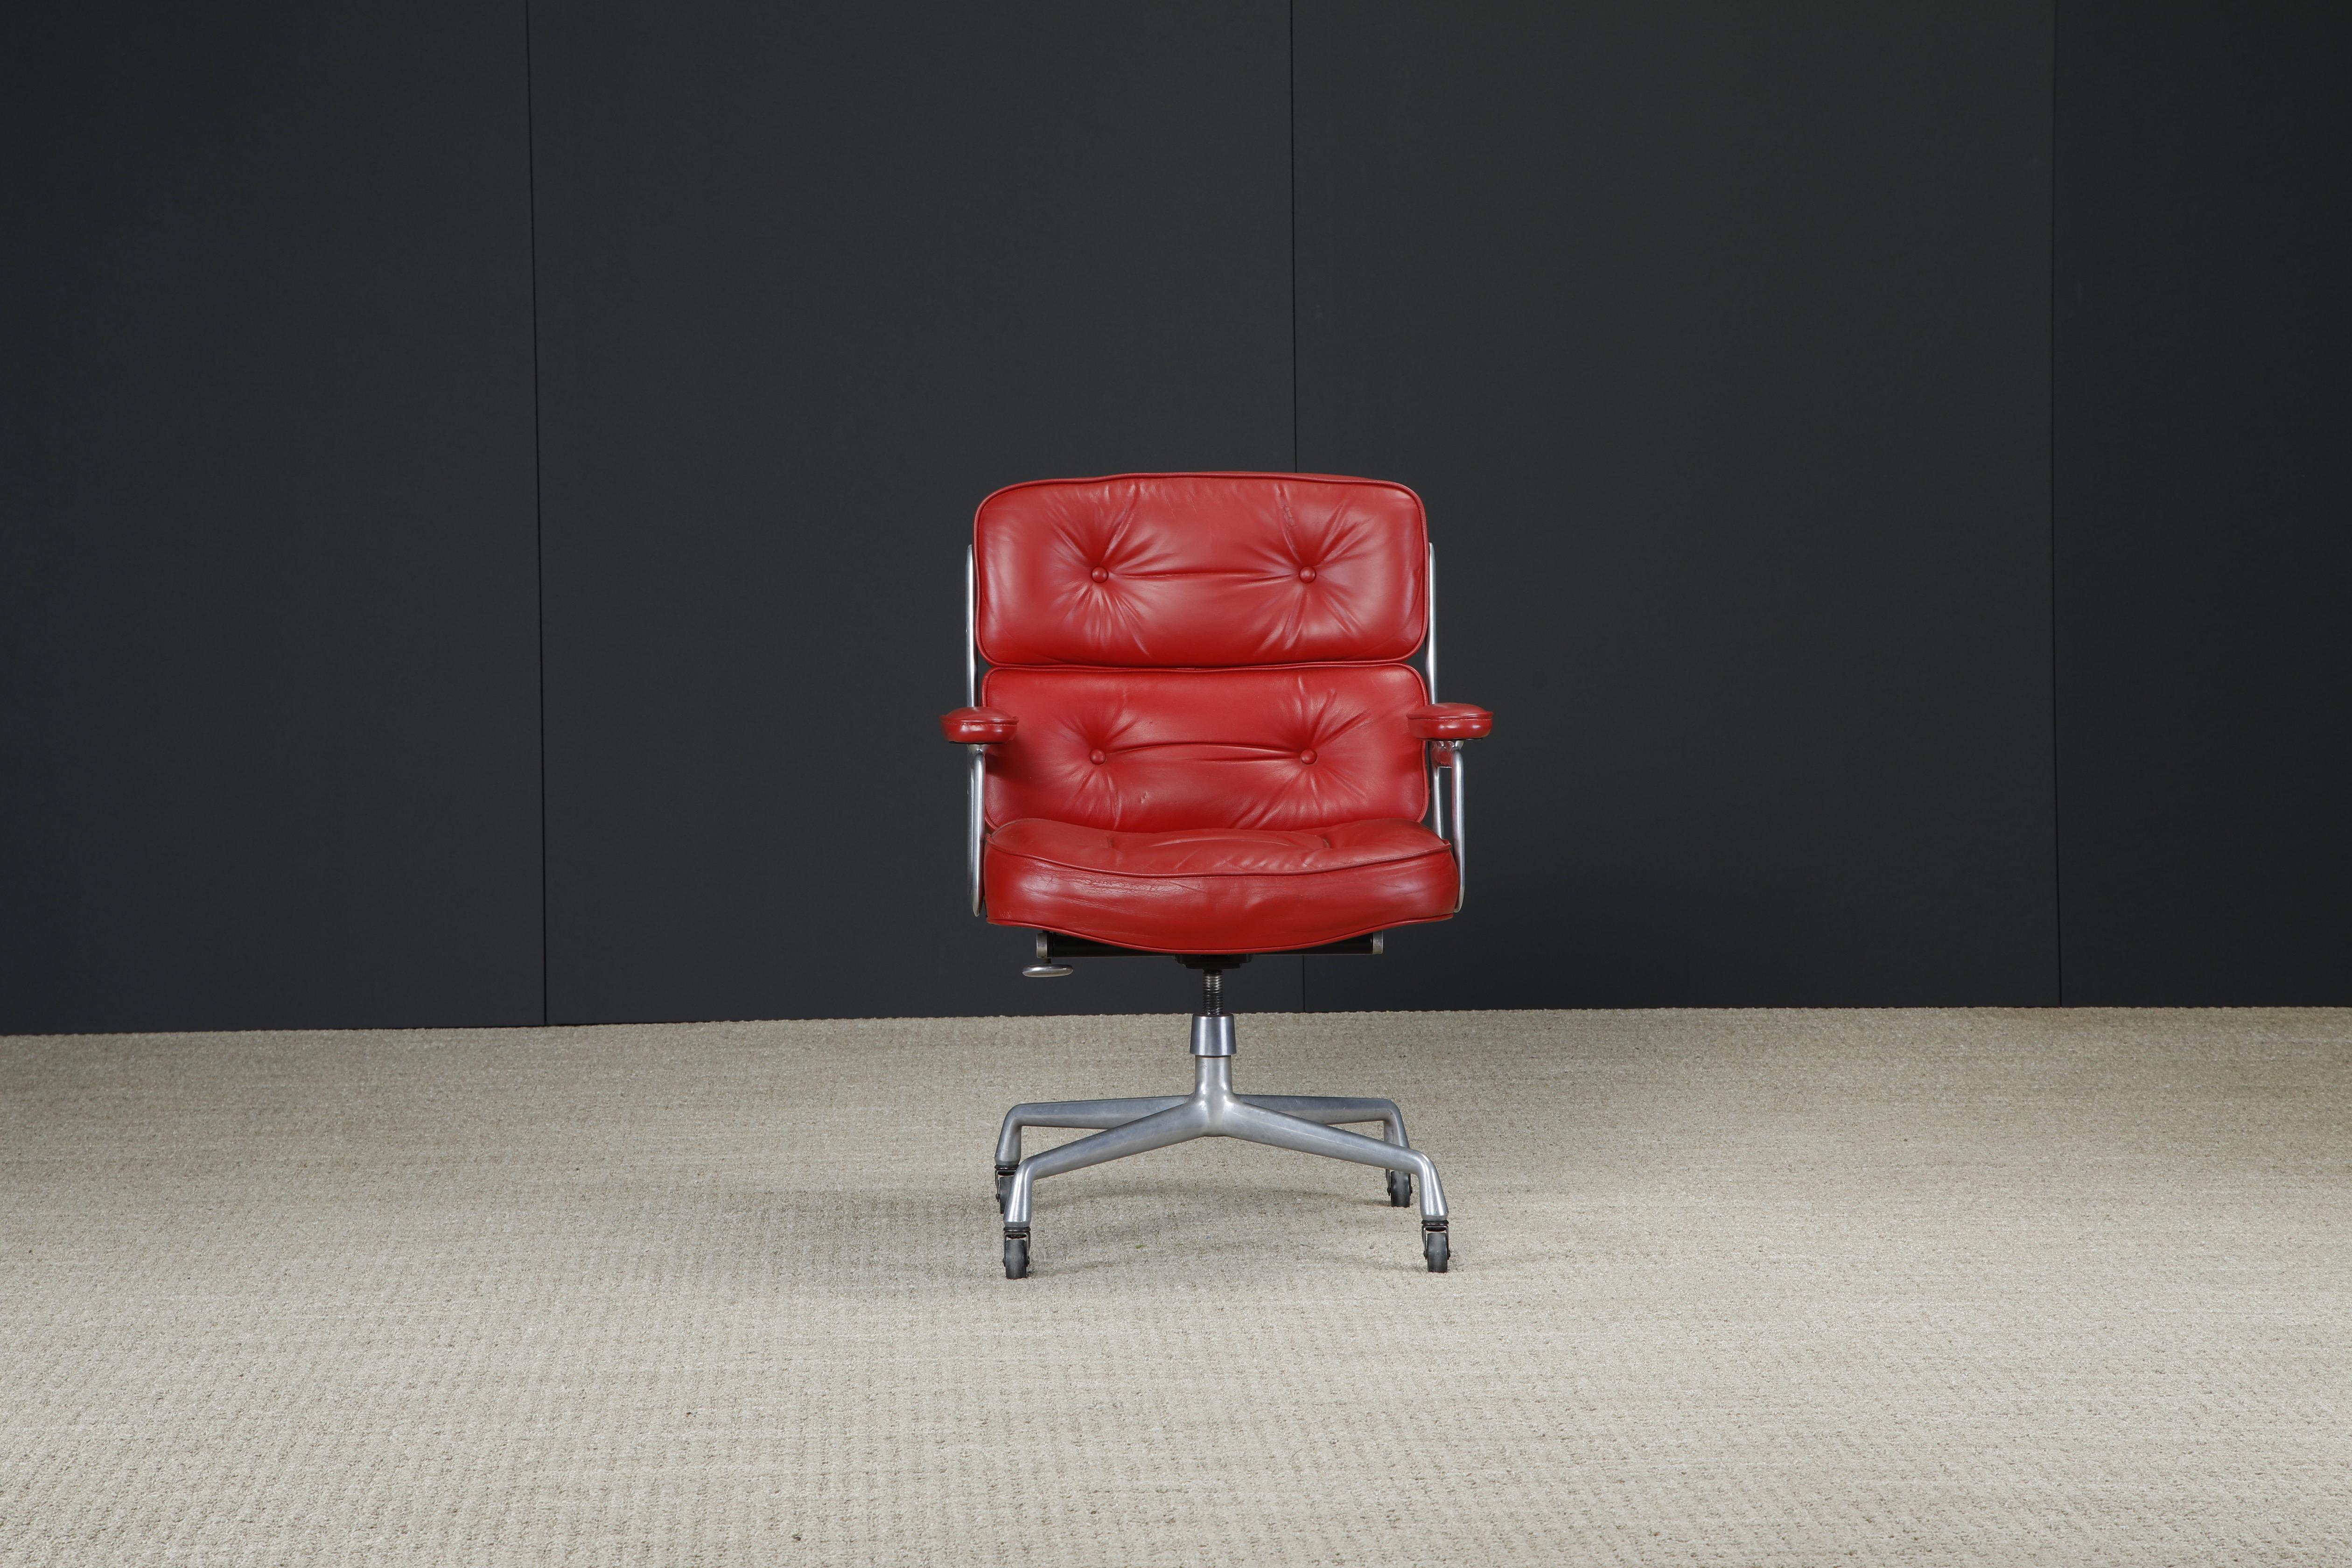 This rare color-way in beautiful red leather is the Time Life Executive Chair (Model ES-104) by Charles and Ray Eames for Herman Miller, originally designed in 1960 for the Time Life building hence the chair's name. 

Signed and dated on a Herman